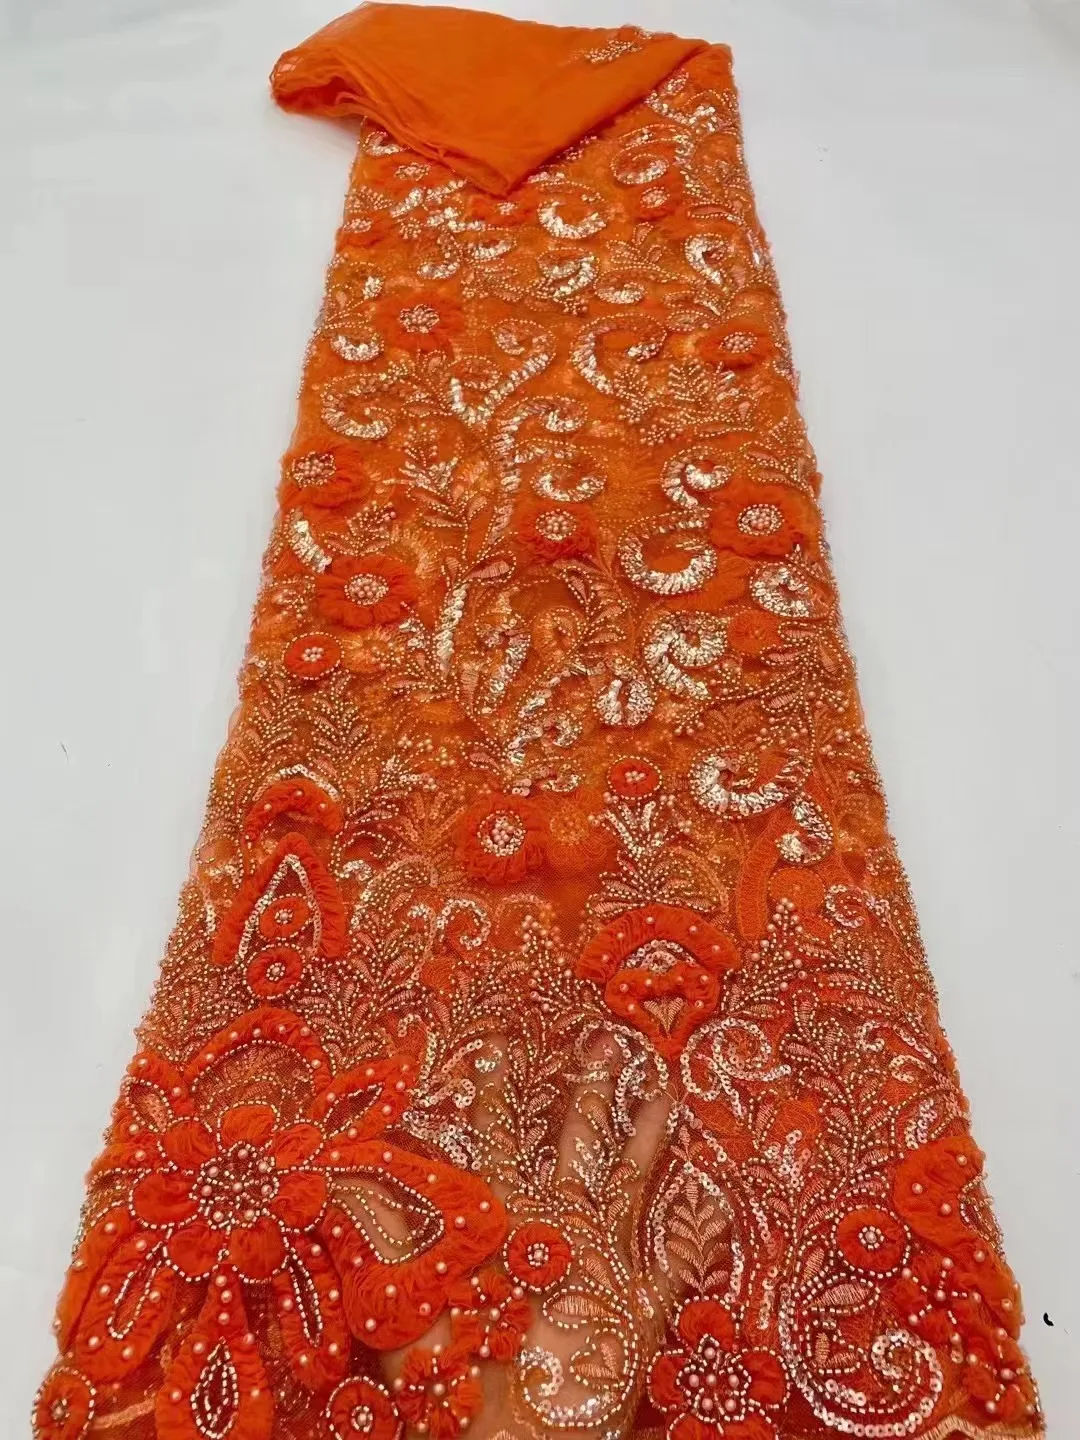 

Hot Orange African beaded Sequin lace fabric 2023 5 yards high quality French Nigerian groom lace fabric sewn dress wedding part